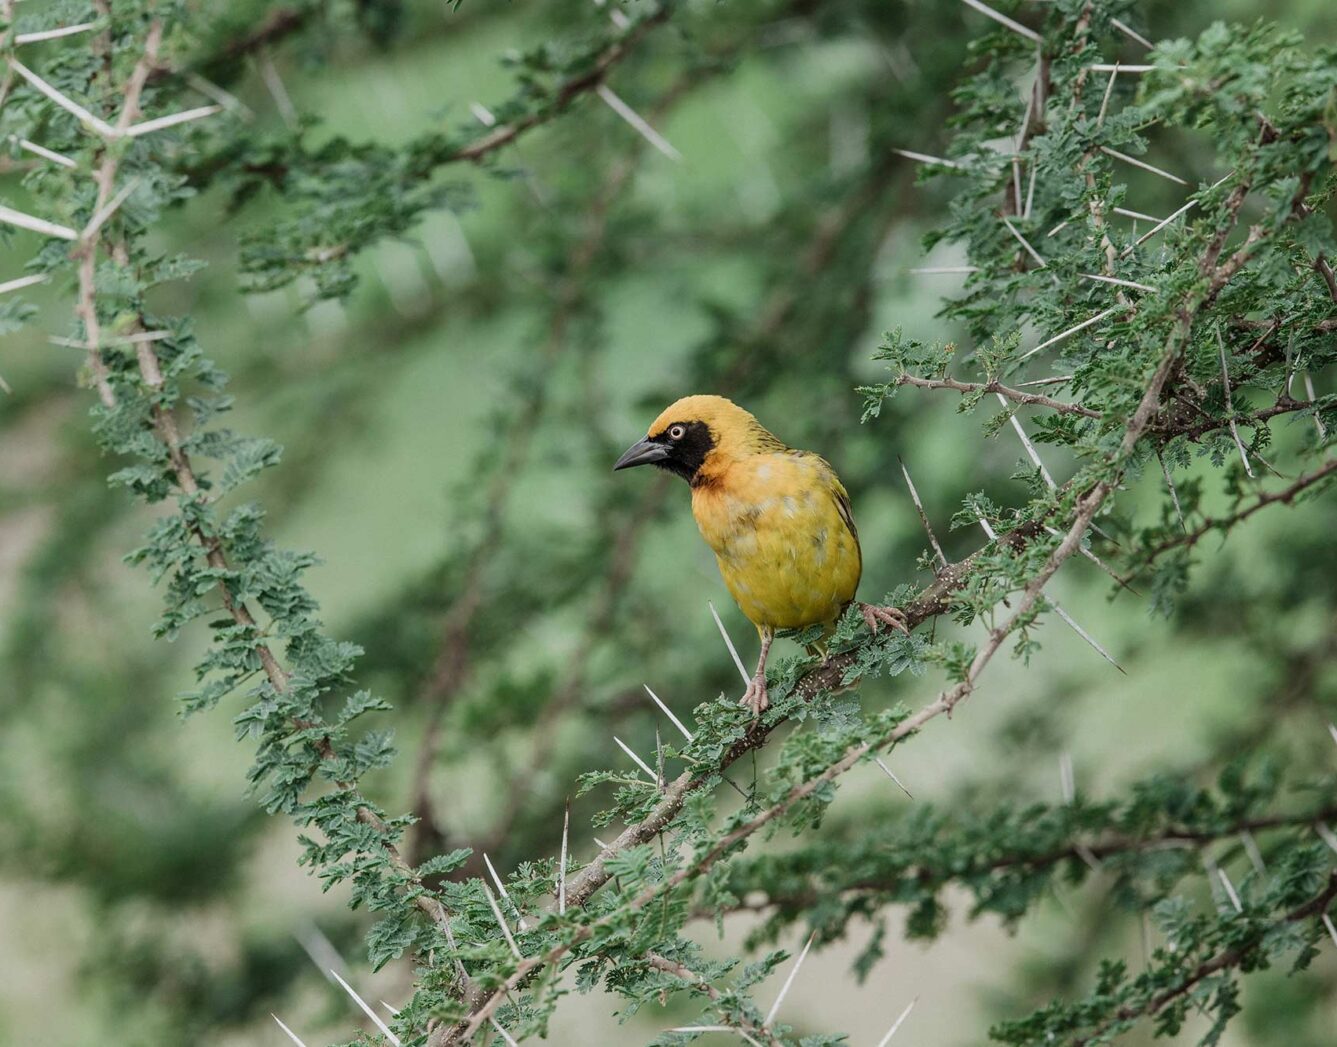 A yellow bird sitting in the tree branches